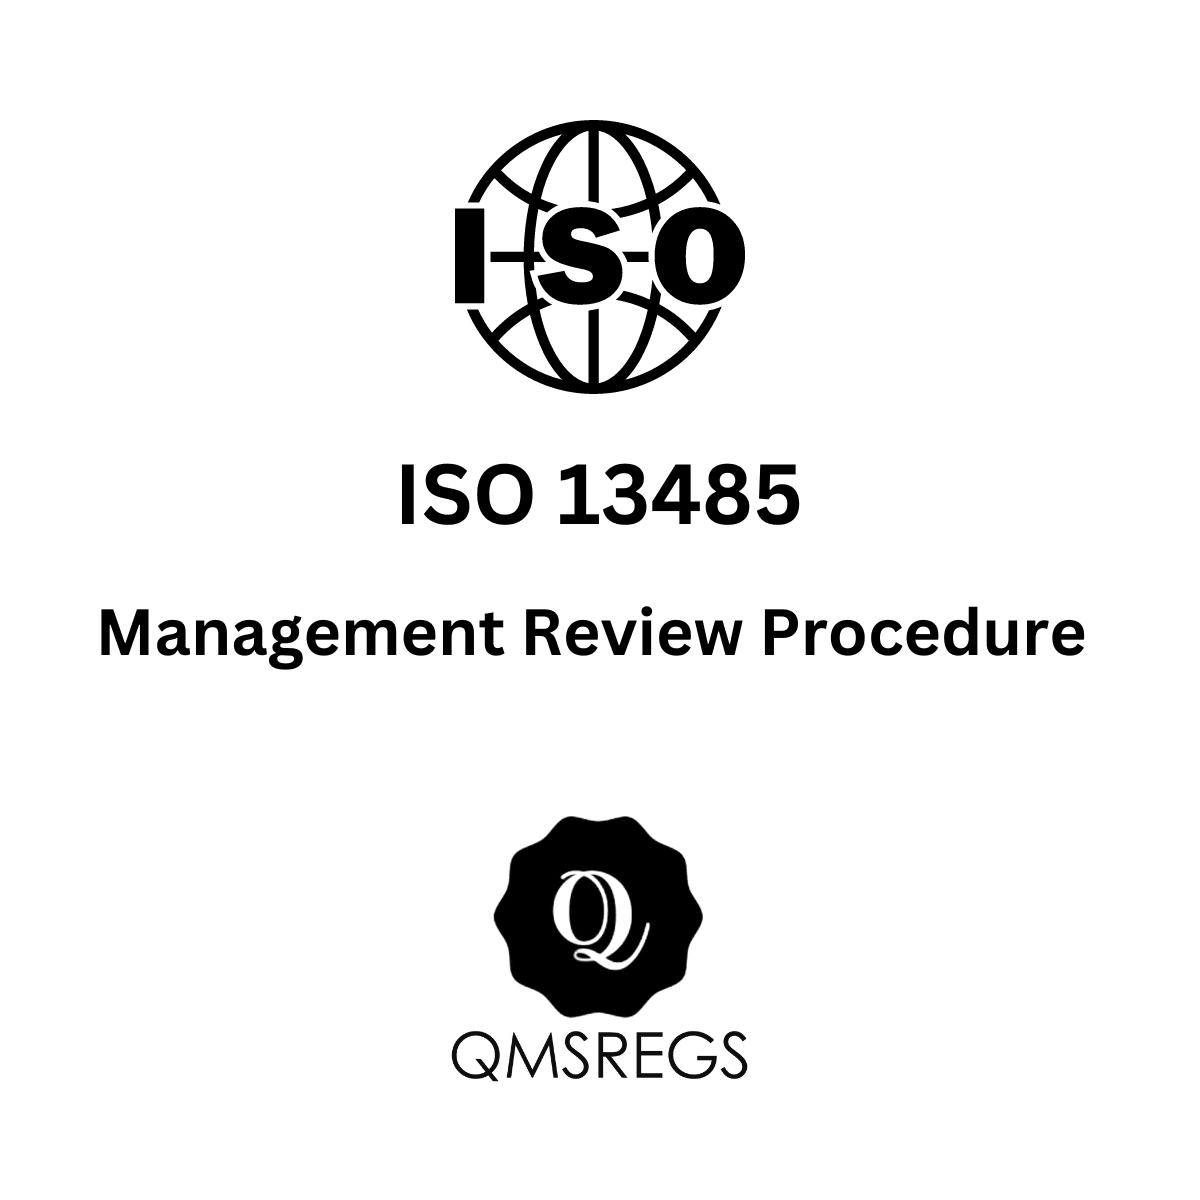 ISO 13485 Management Review Procedure Template